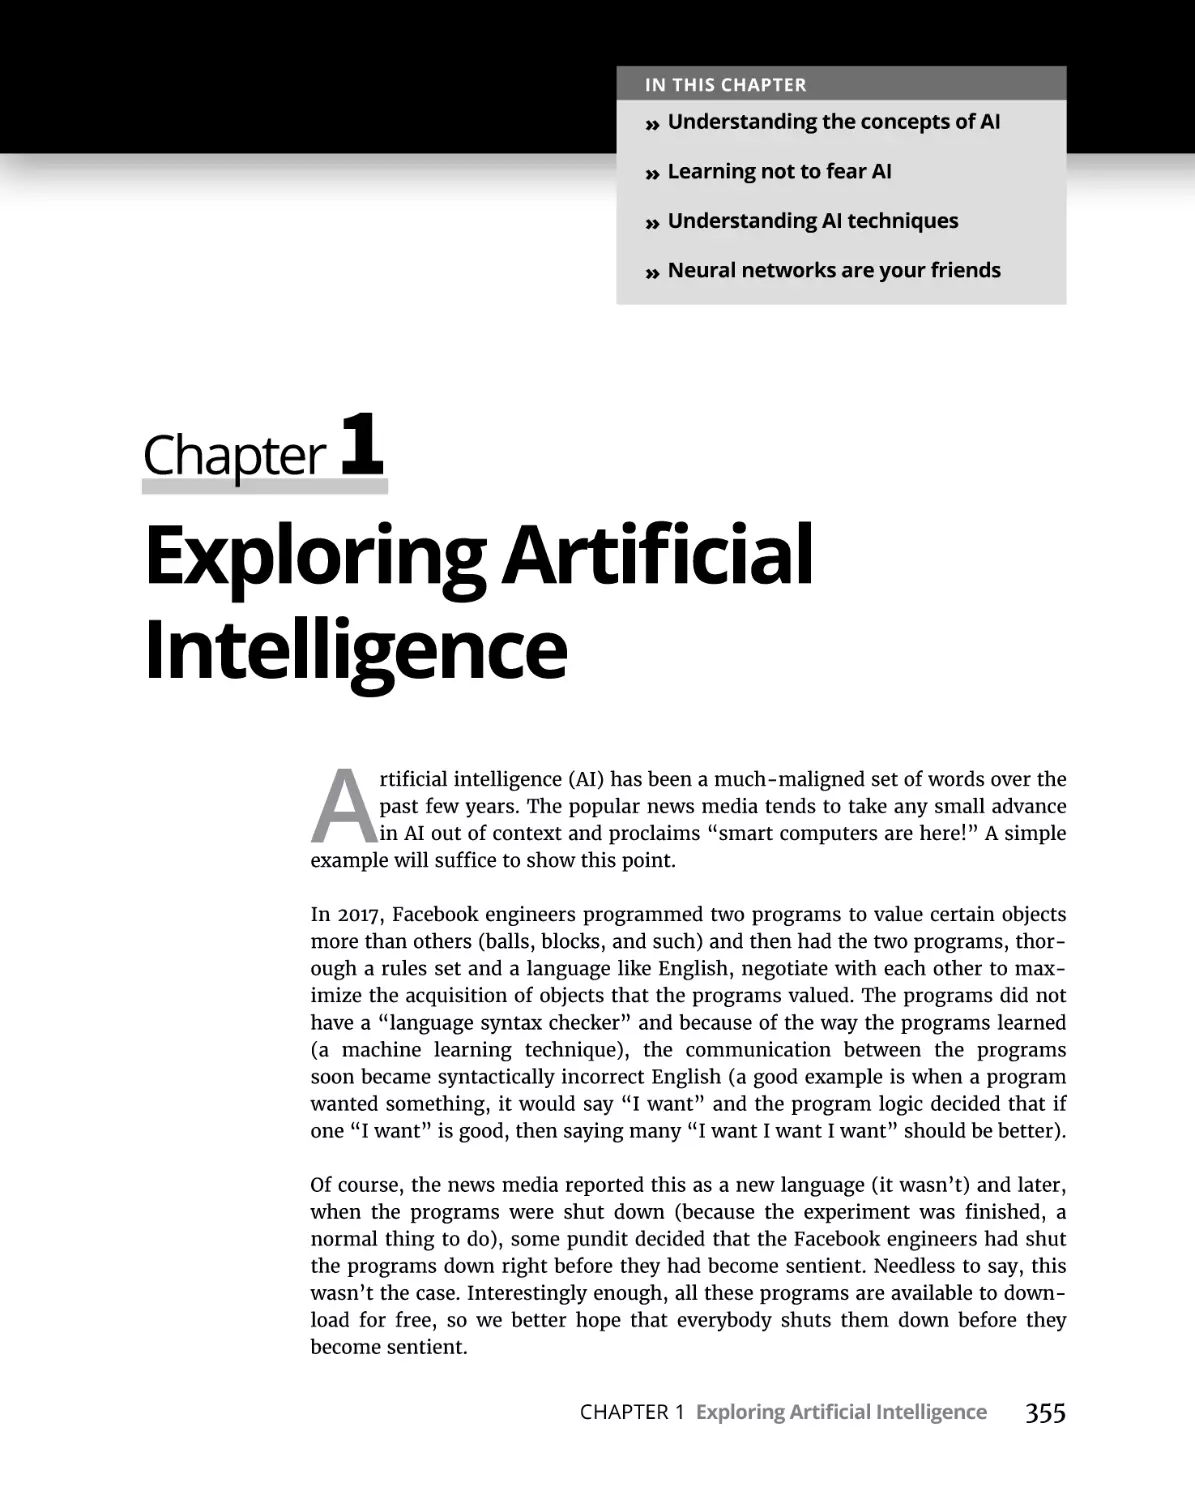 Chapter 1 Exploring Artificial Intelligence